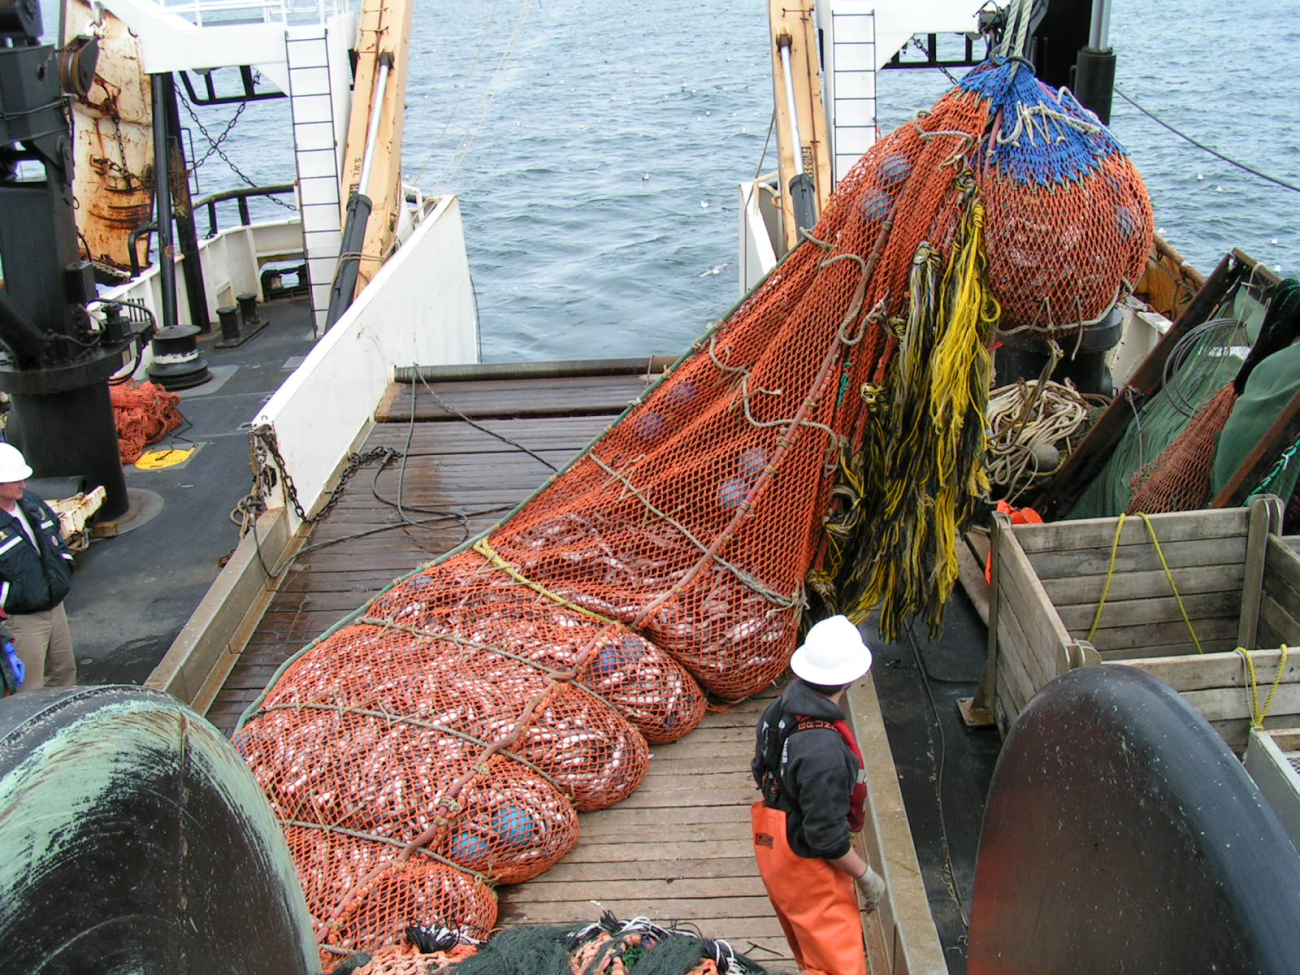 Preparing to dump part of the trawl catch in the sorting bins